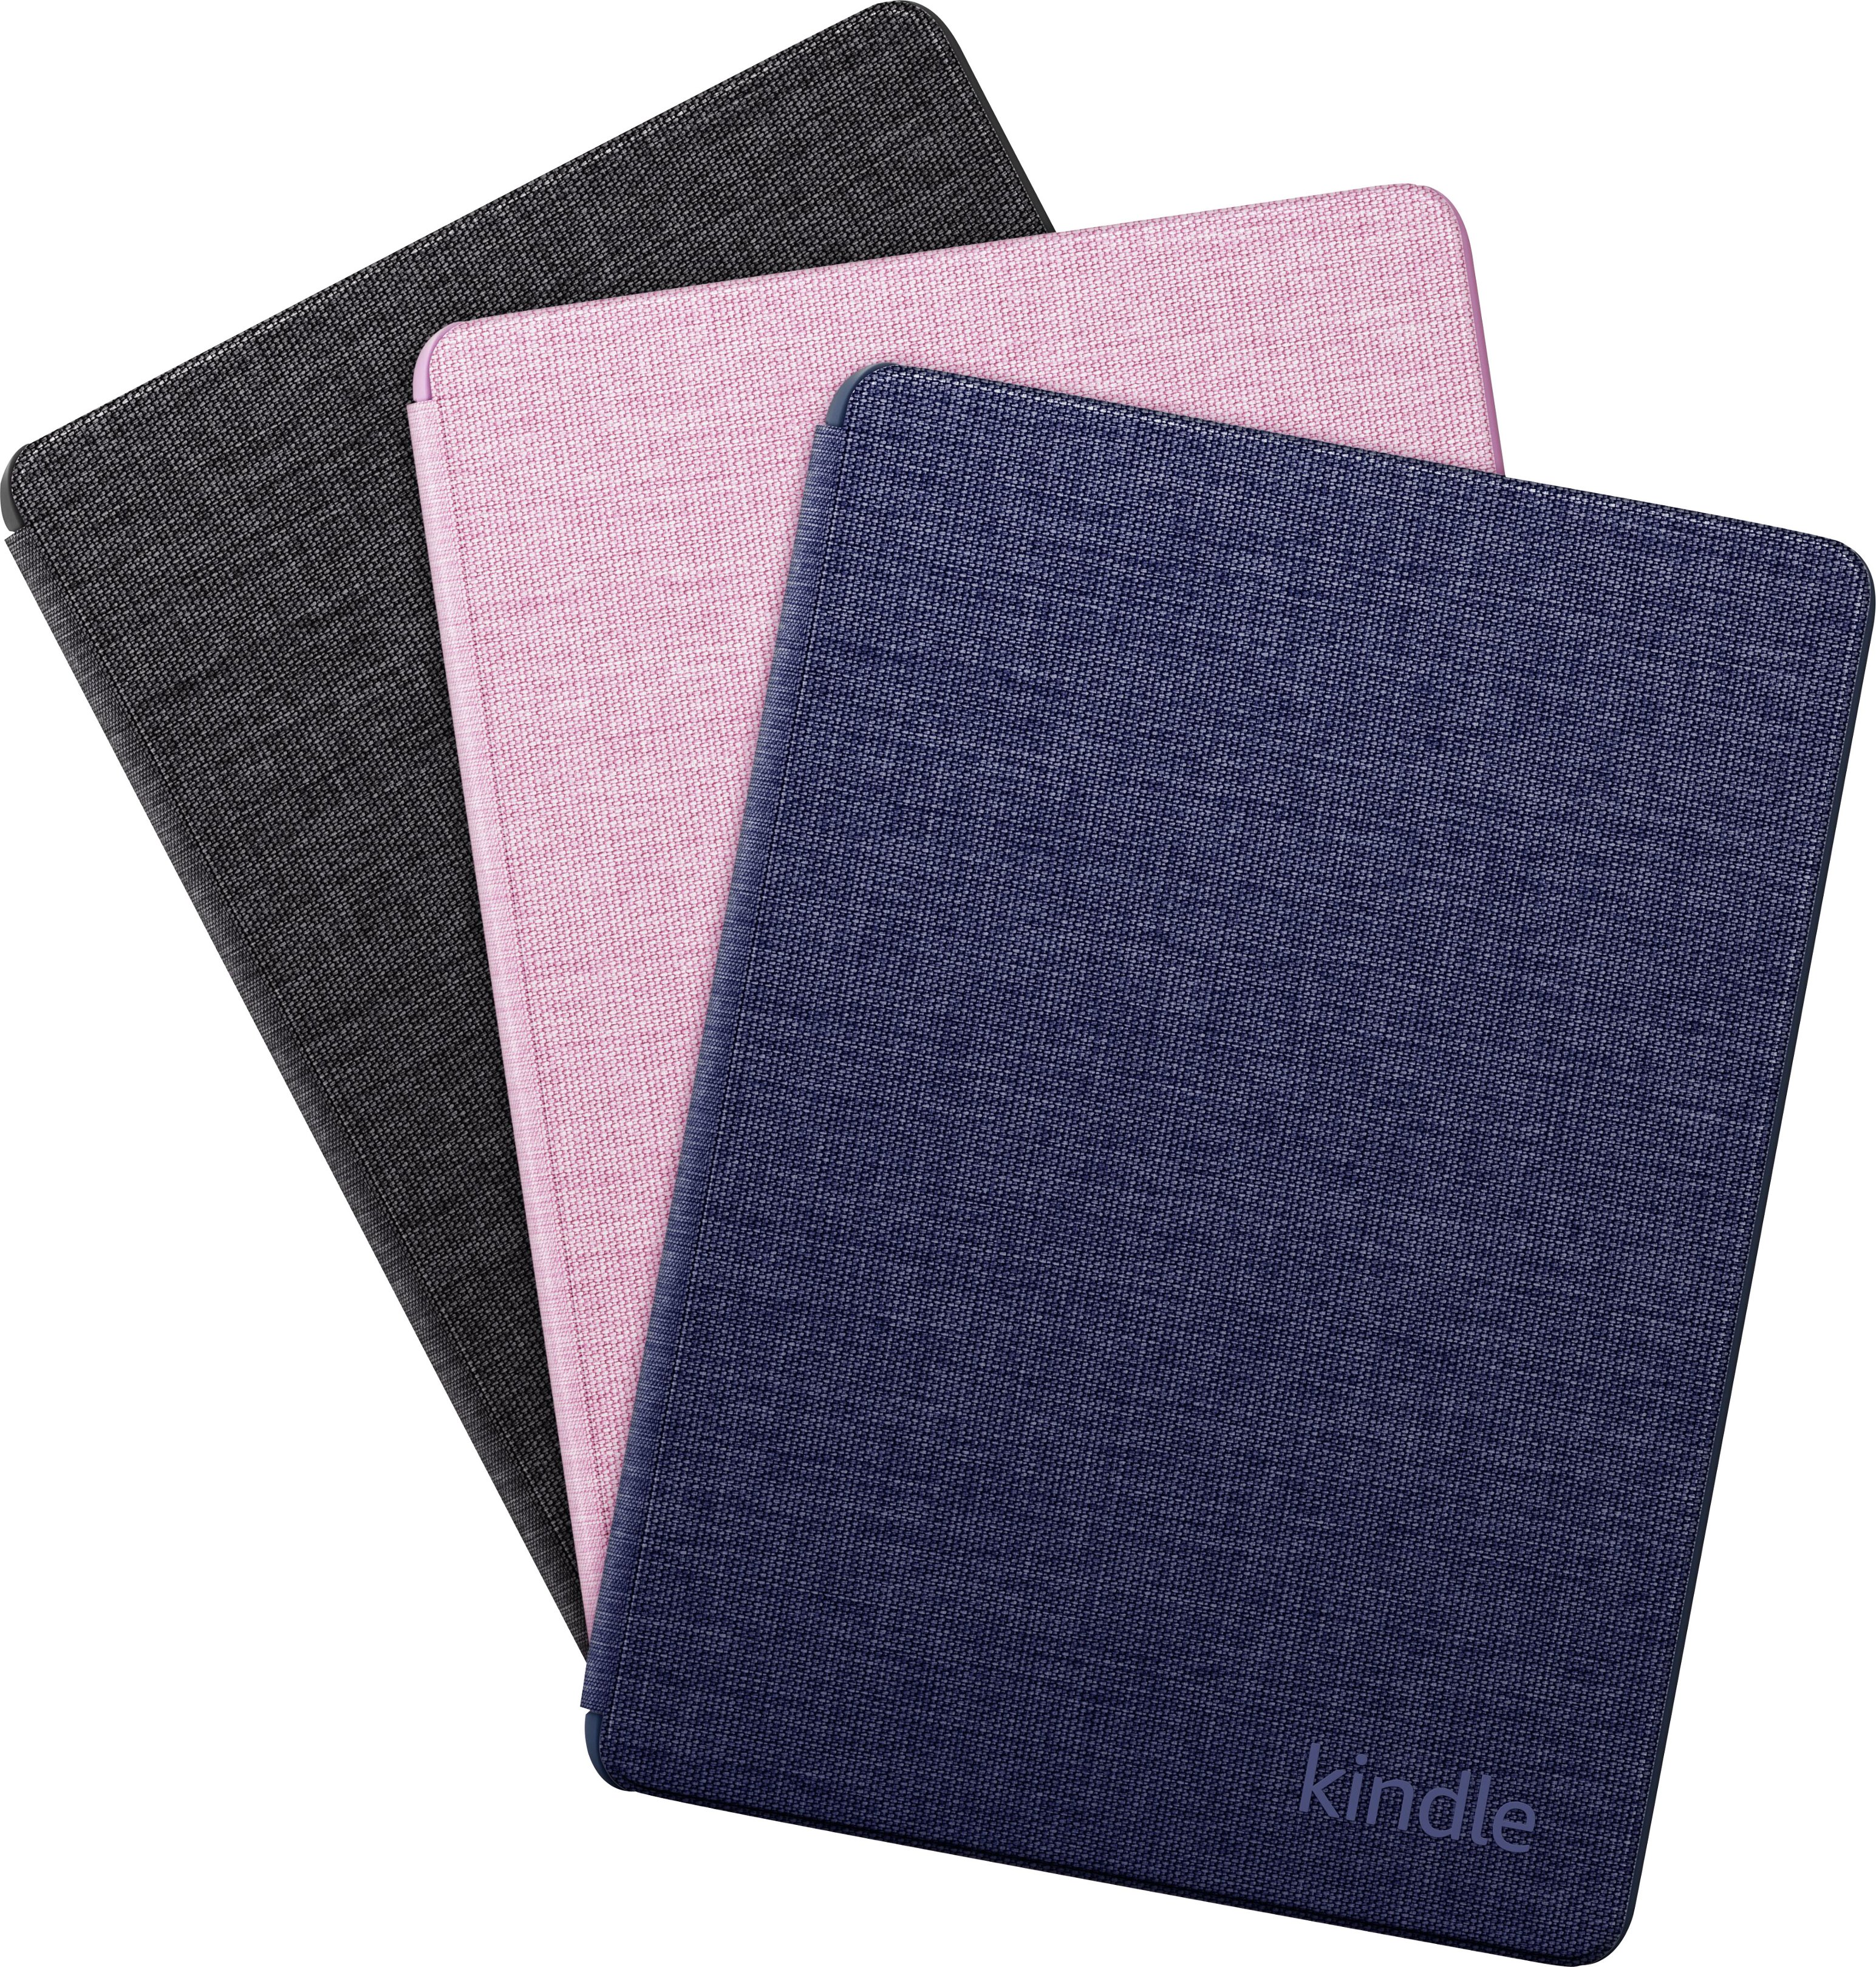 Kindle Paperwhite Cover Fabric (11th Generation-2021) Lavender Haze  B08VYZS786 - Best Buy